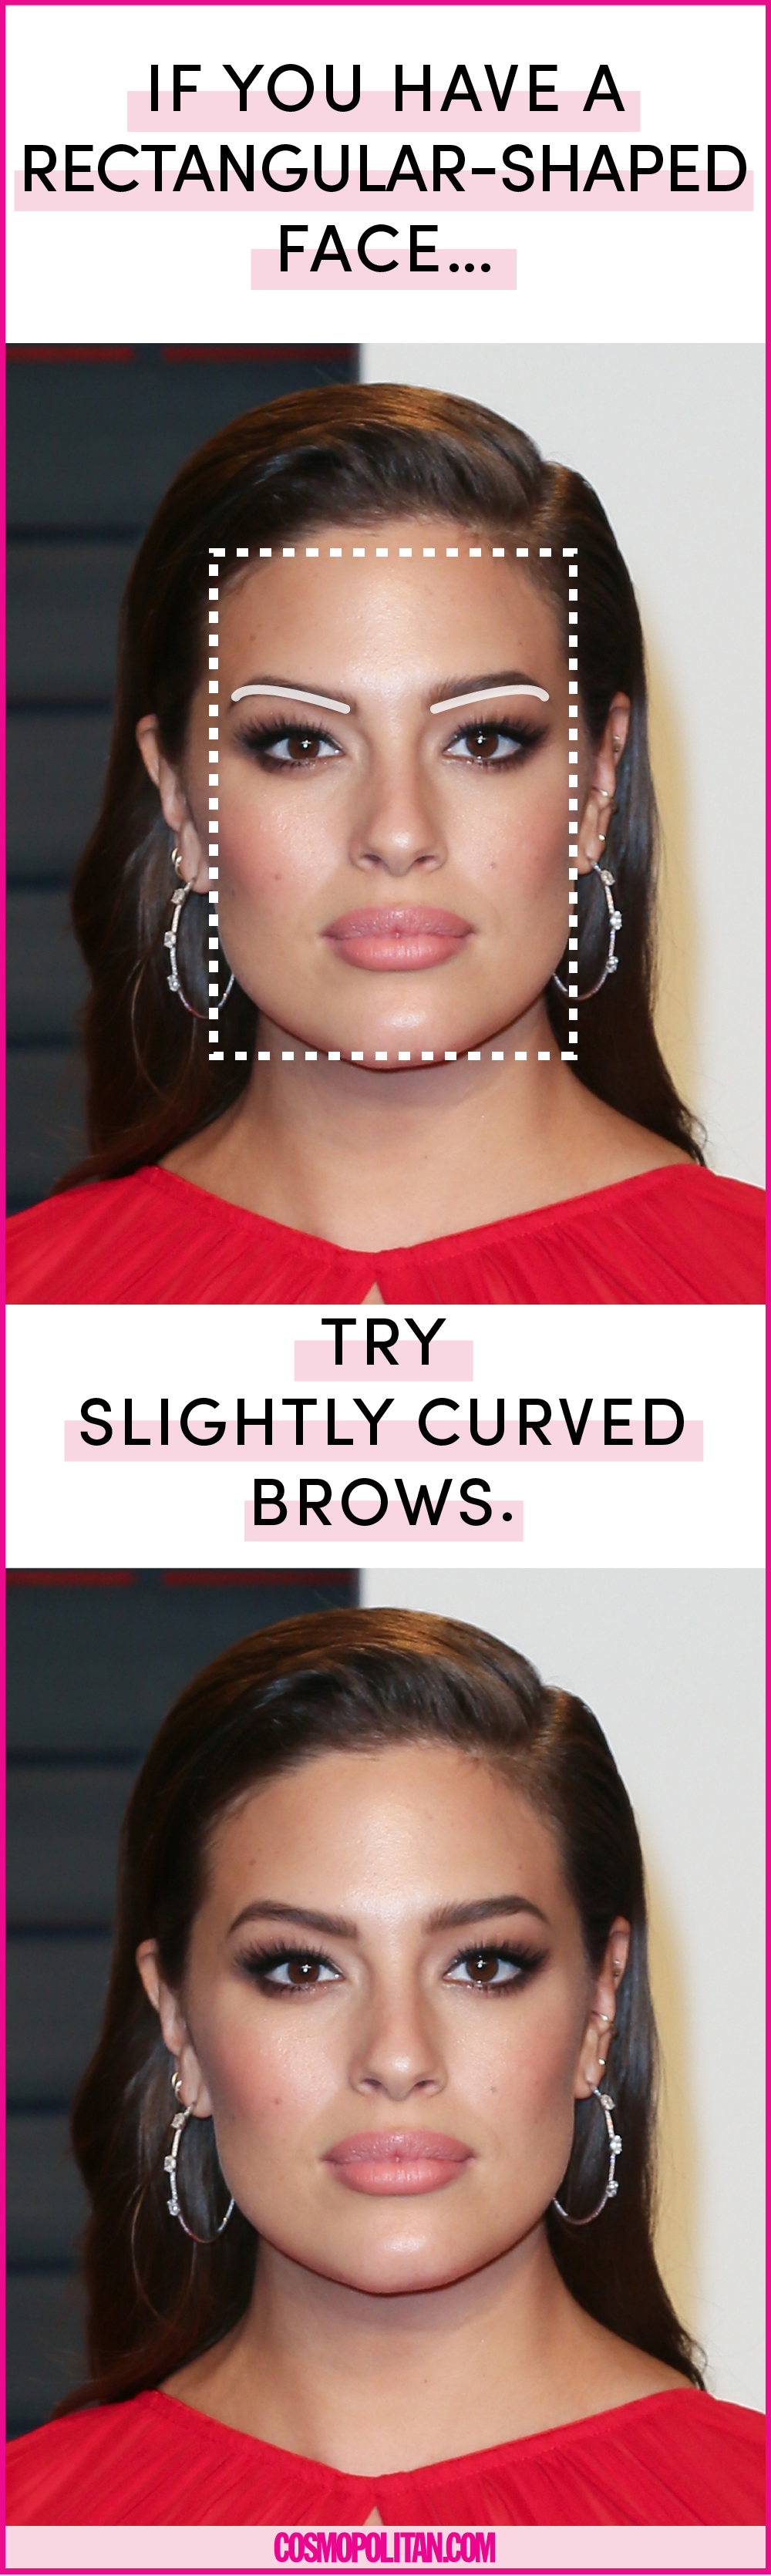 Different Eyebrow Shapes for Your Face - How to Shape Your ...